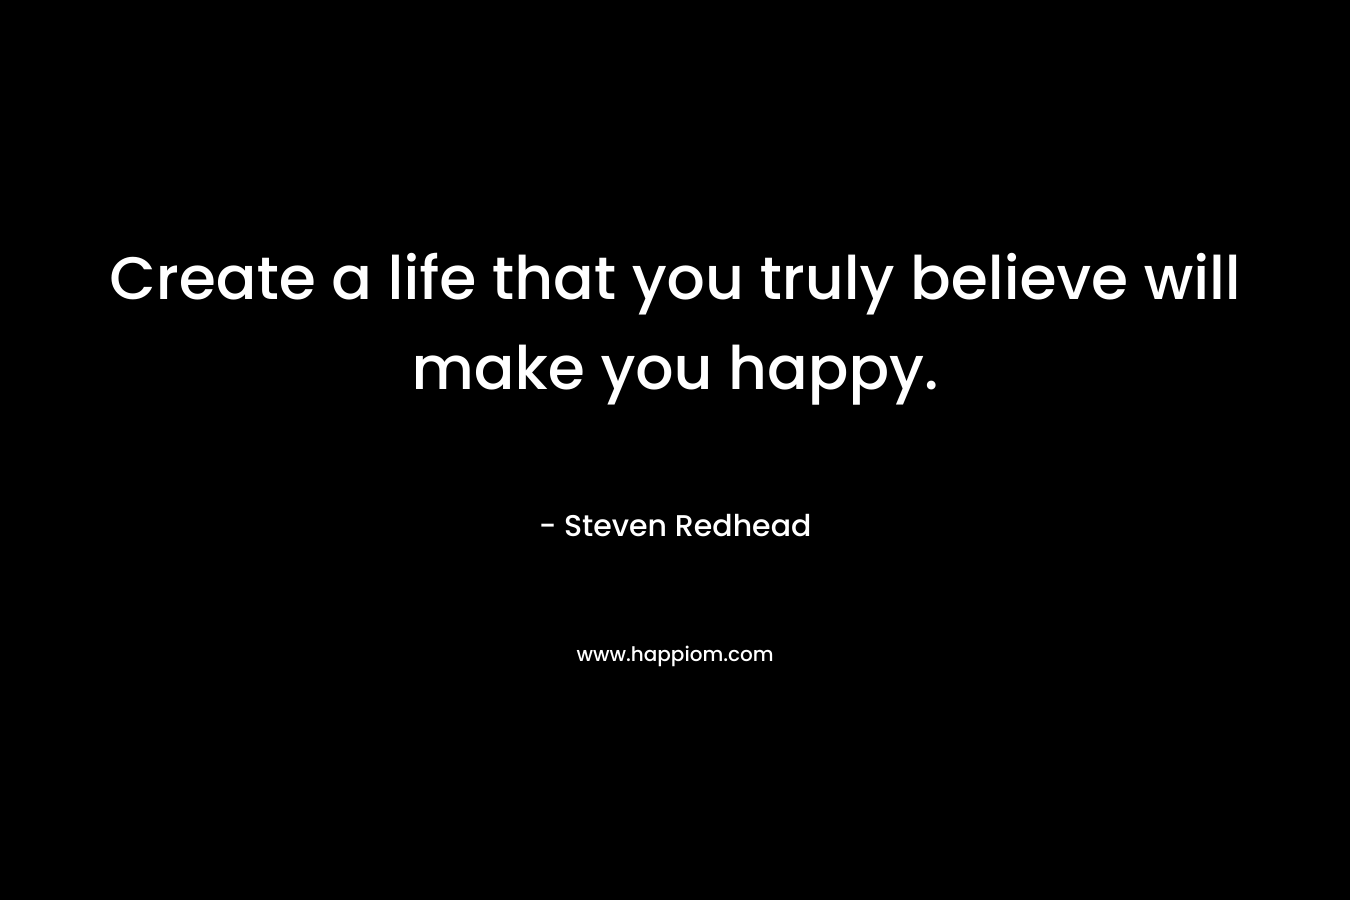 Create a life that you truly believe will make you happy.